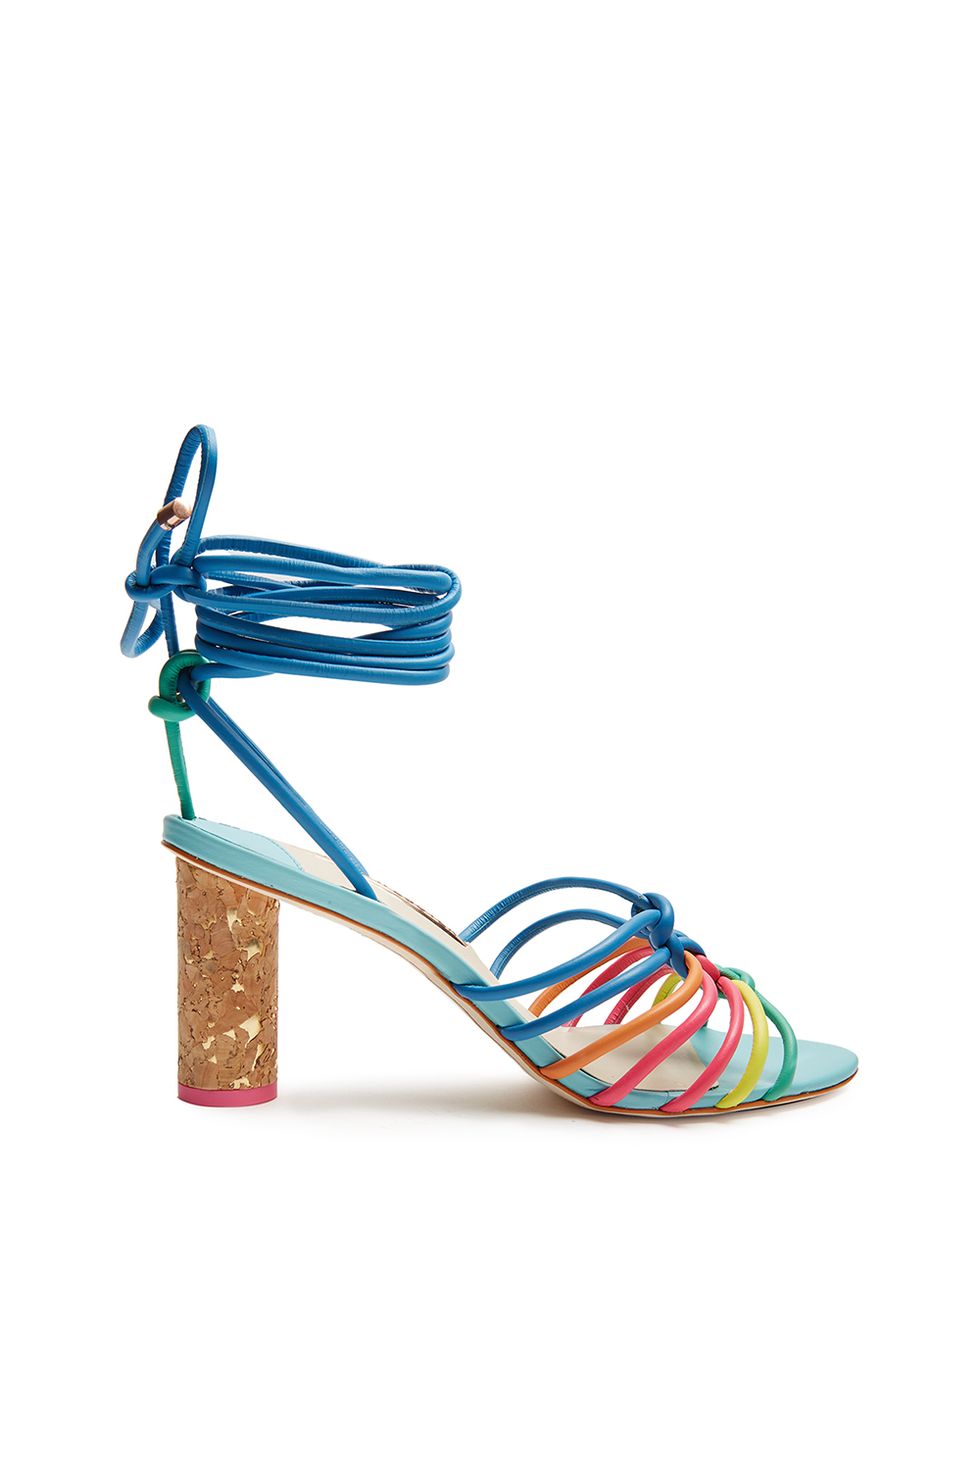 <p>The shoes you dreamt up when you were 12. (In the best way.)</p><p>Sophia Webster heels, $495; <a href="http://www.matchesfashion.com/us/products/Sophia-Webster-Copacabana-cork-heel-leather-sandals-1073263" target="_blank" data-tracking-id="recirc-text-link">matchesfashion.com</a> </p>